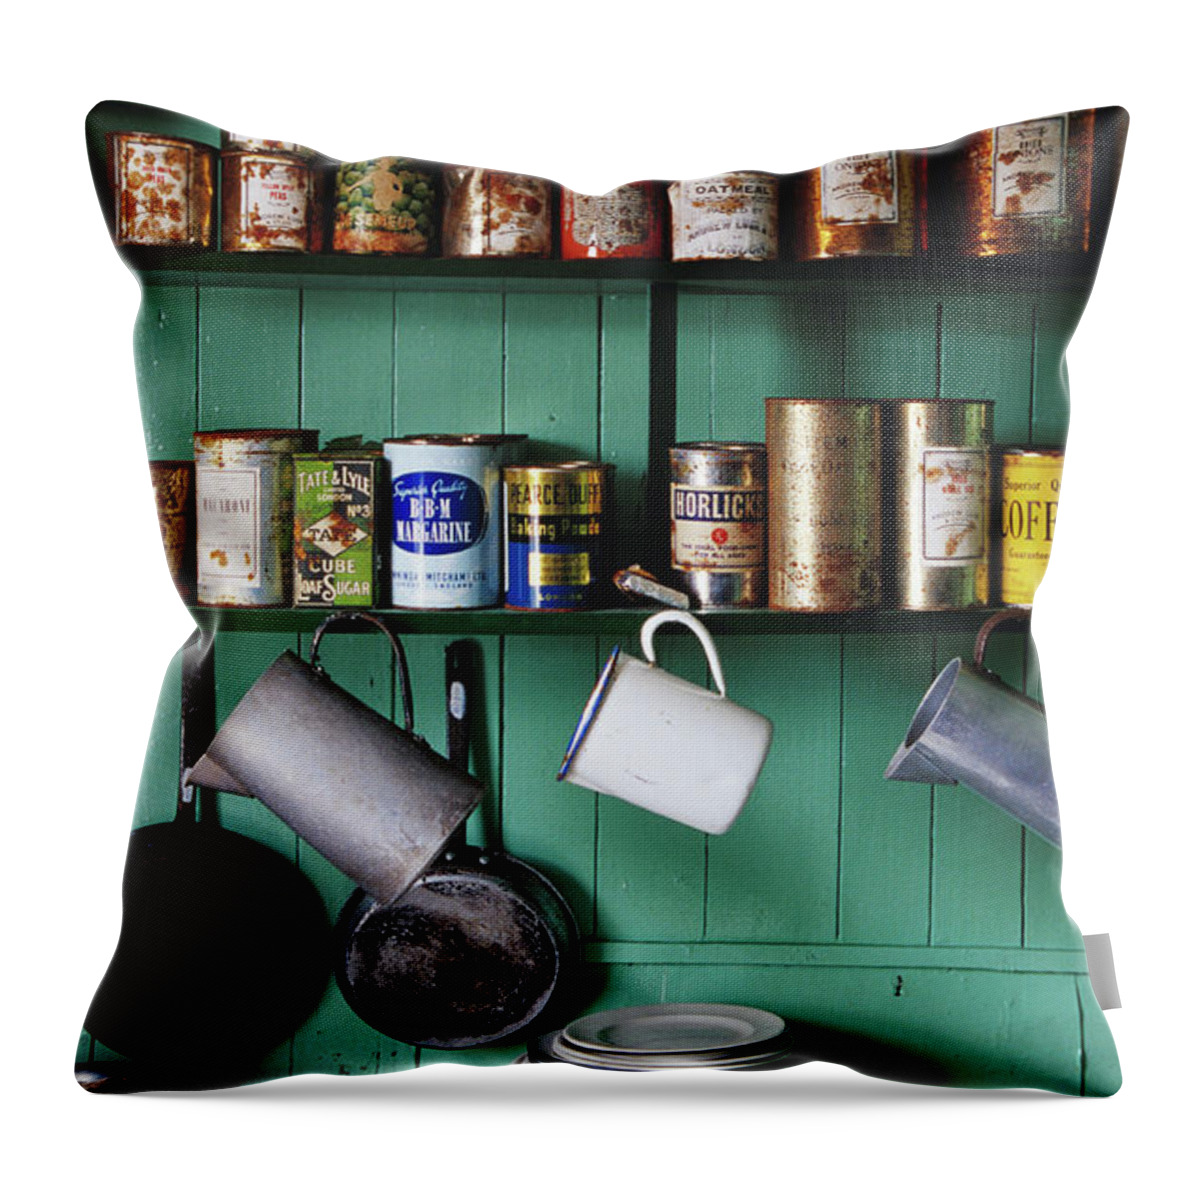 Cooking Utensil Throw Pillow featuring the photograph Kitchen Shelves In Museum At British by Richard I'anson